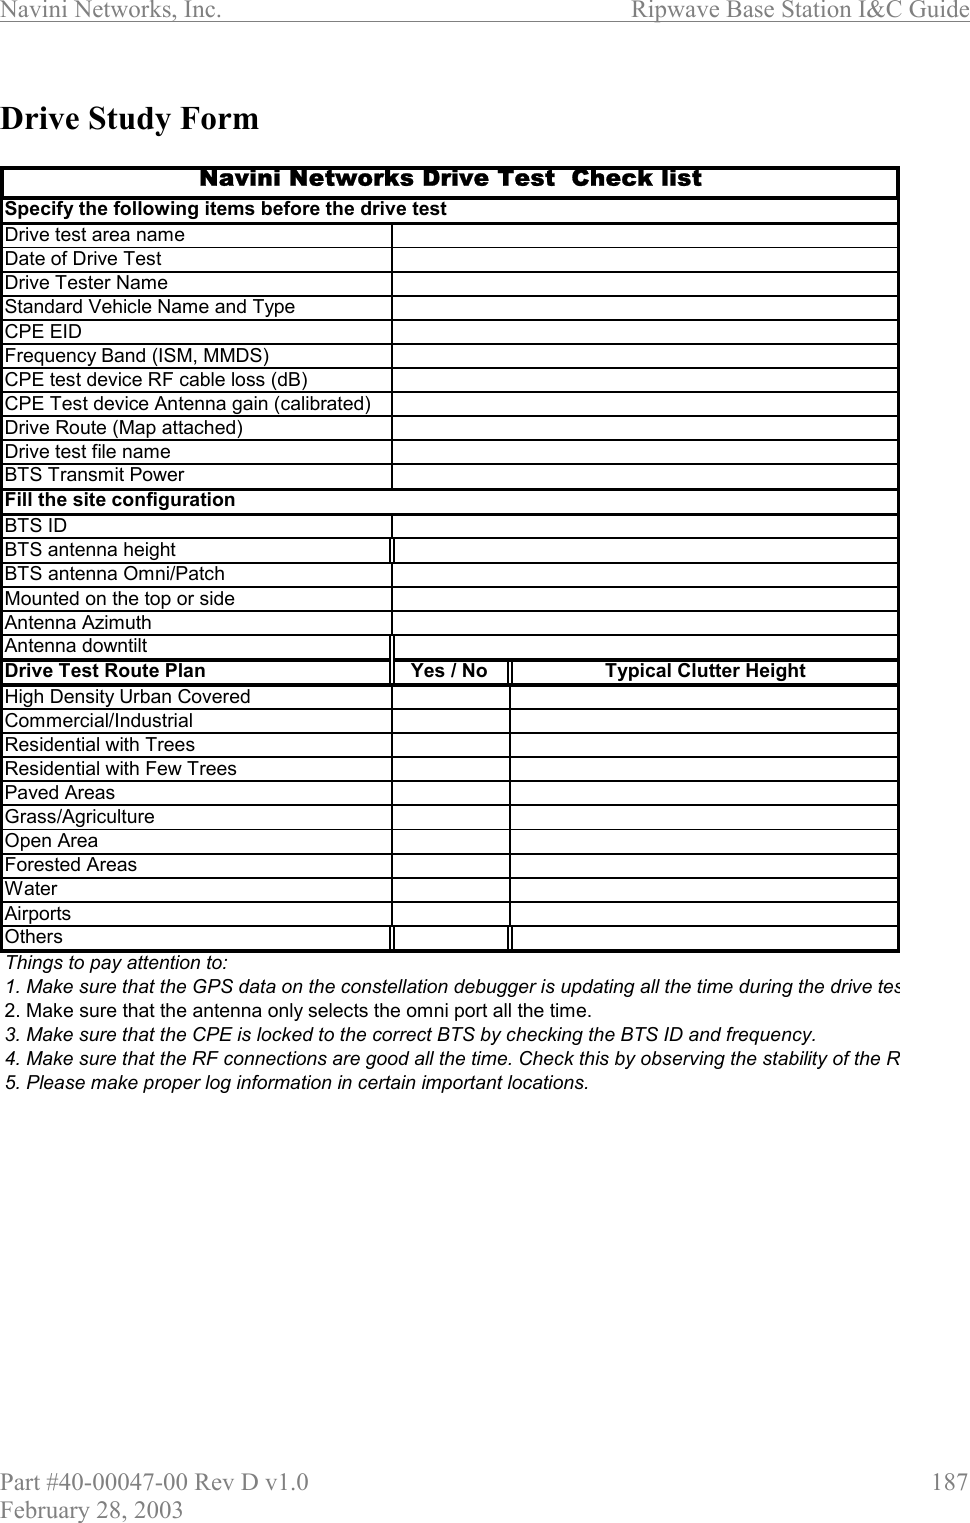 Navini Networks, Inc.                          Ripwave Base Station I&amp;C Guide Part #40-00047-00 Rev D v1.0                     187 February 28, 2003  Drive Study Form   Drive test area nameDate of Drive TestDrive Tester NameStandard Vehicle Name and TypeCPE EIDFrequency Band (ISM, MMDS)CPE test device RF cable loss (dB) CPE Test device Antenna gain (calibrated)Drive Route (Map attached)Drive test file nameBTS Transmit PowerBTS IDBTS antenna heightBTS antenna Omni/PatchMounted on the top or sideAntenna AzimuthAntenna downtiltDrive Test Route Plan Yes / No  Typical Clutter HeightHigh Density Urban CoveredCommercial/IndustrialResidential with TreesResidential with Few TreesPaved AreasGrass/AgricultureOpen AreaForested AreasWaterAirportsOthersThings to pay attention to:1. Make sure that the GPS data on the constellation debugger is updating all the time during the drive tes2. Make sure that the antenna only selects the omni port all the time.3. Make sure that the CPE is locked to the correct BTS by checking the BTS ID and frequency.4. Make sure that the RF connections are good all the time. Check this by observing the stability of the R5. Please make proper log information in certain important locations.Fill the site configurationNavini Networks Drive Test  Check listSpecify the following items before the drive test